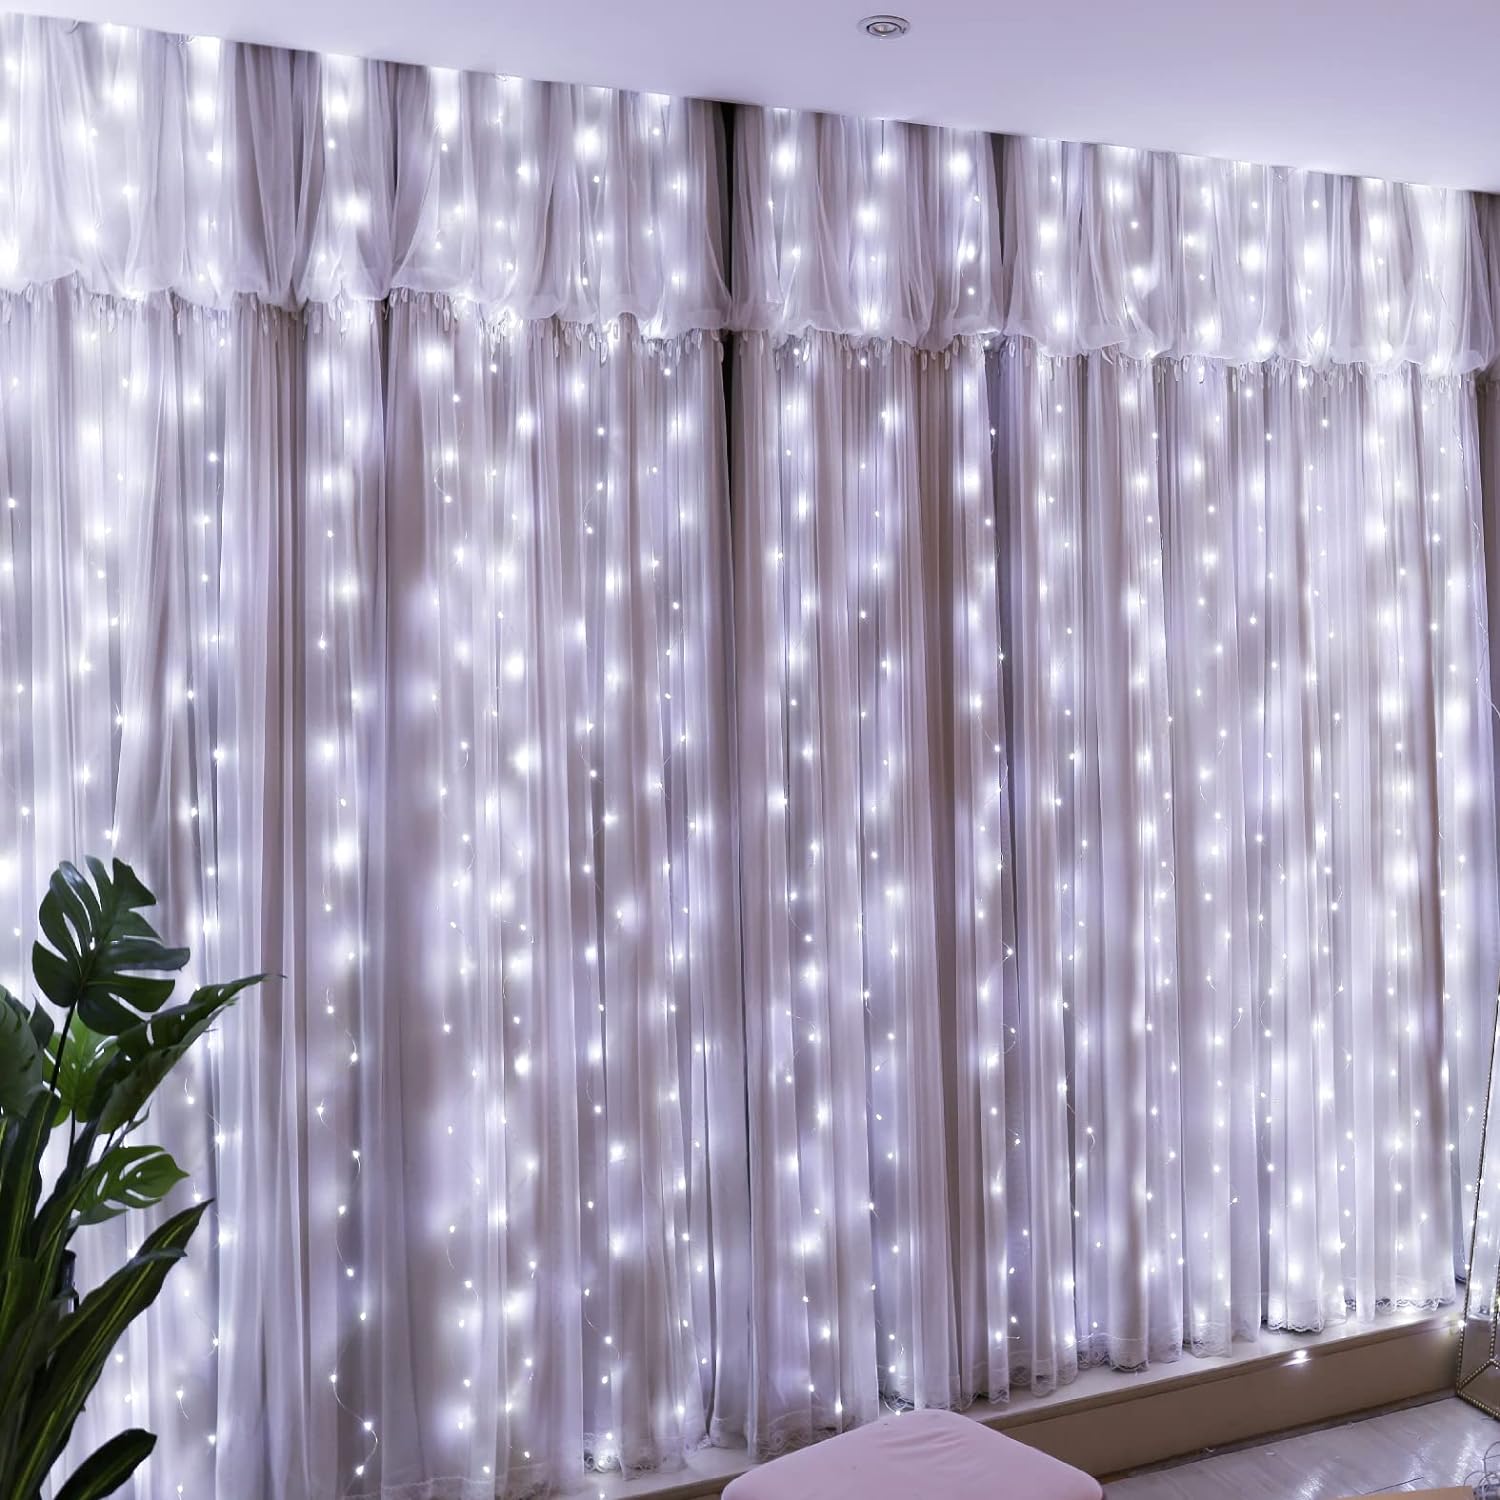 HXWEIYE 300LED Fairy Curtain Light (Upgrade Two Kinds of Light Clips) with Remote 8 Modes Times9.8x9.8Ft White USB Plug-in Christmas Hanging String Light for Bedroom, Parties, Walls, Windows